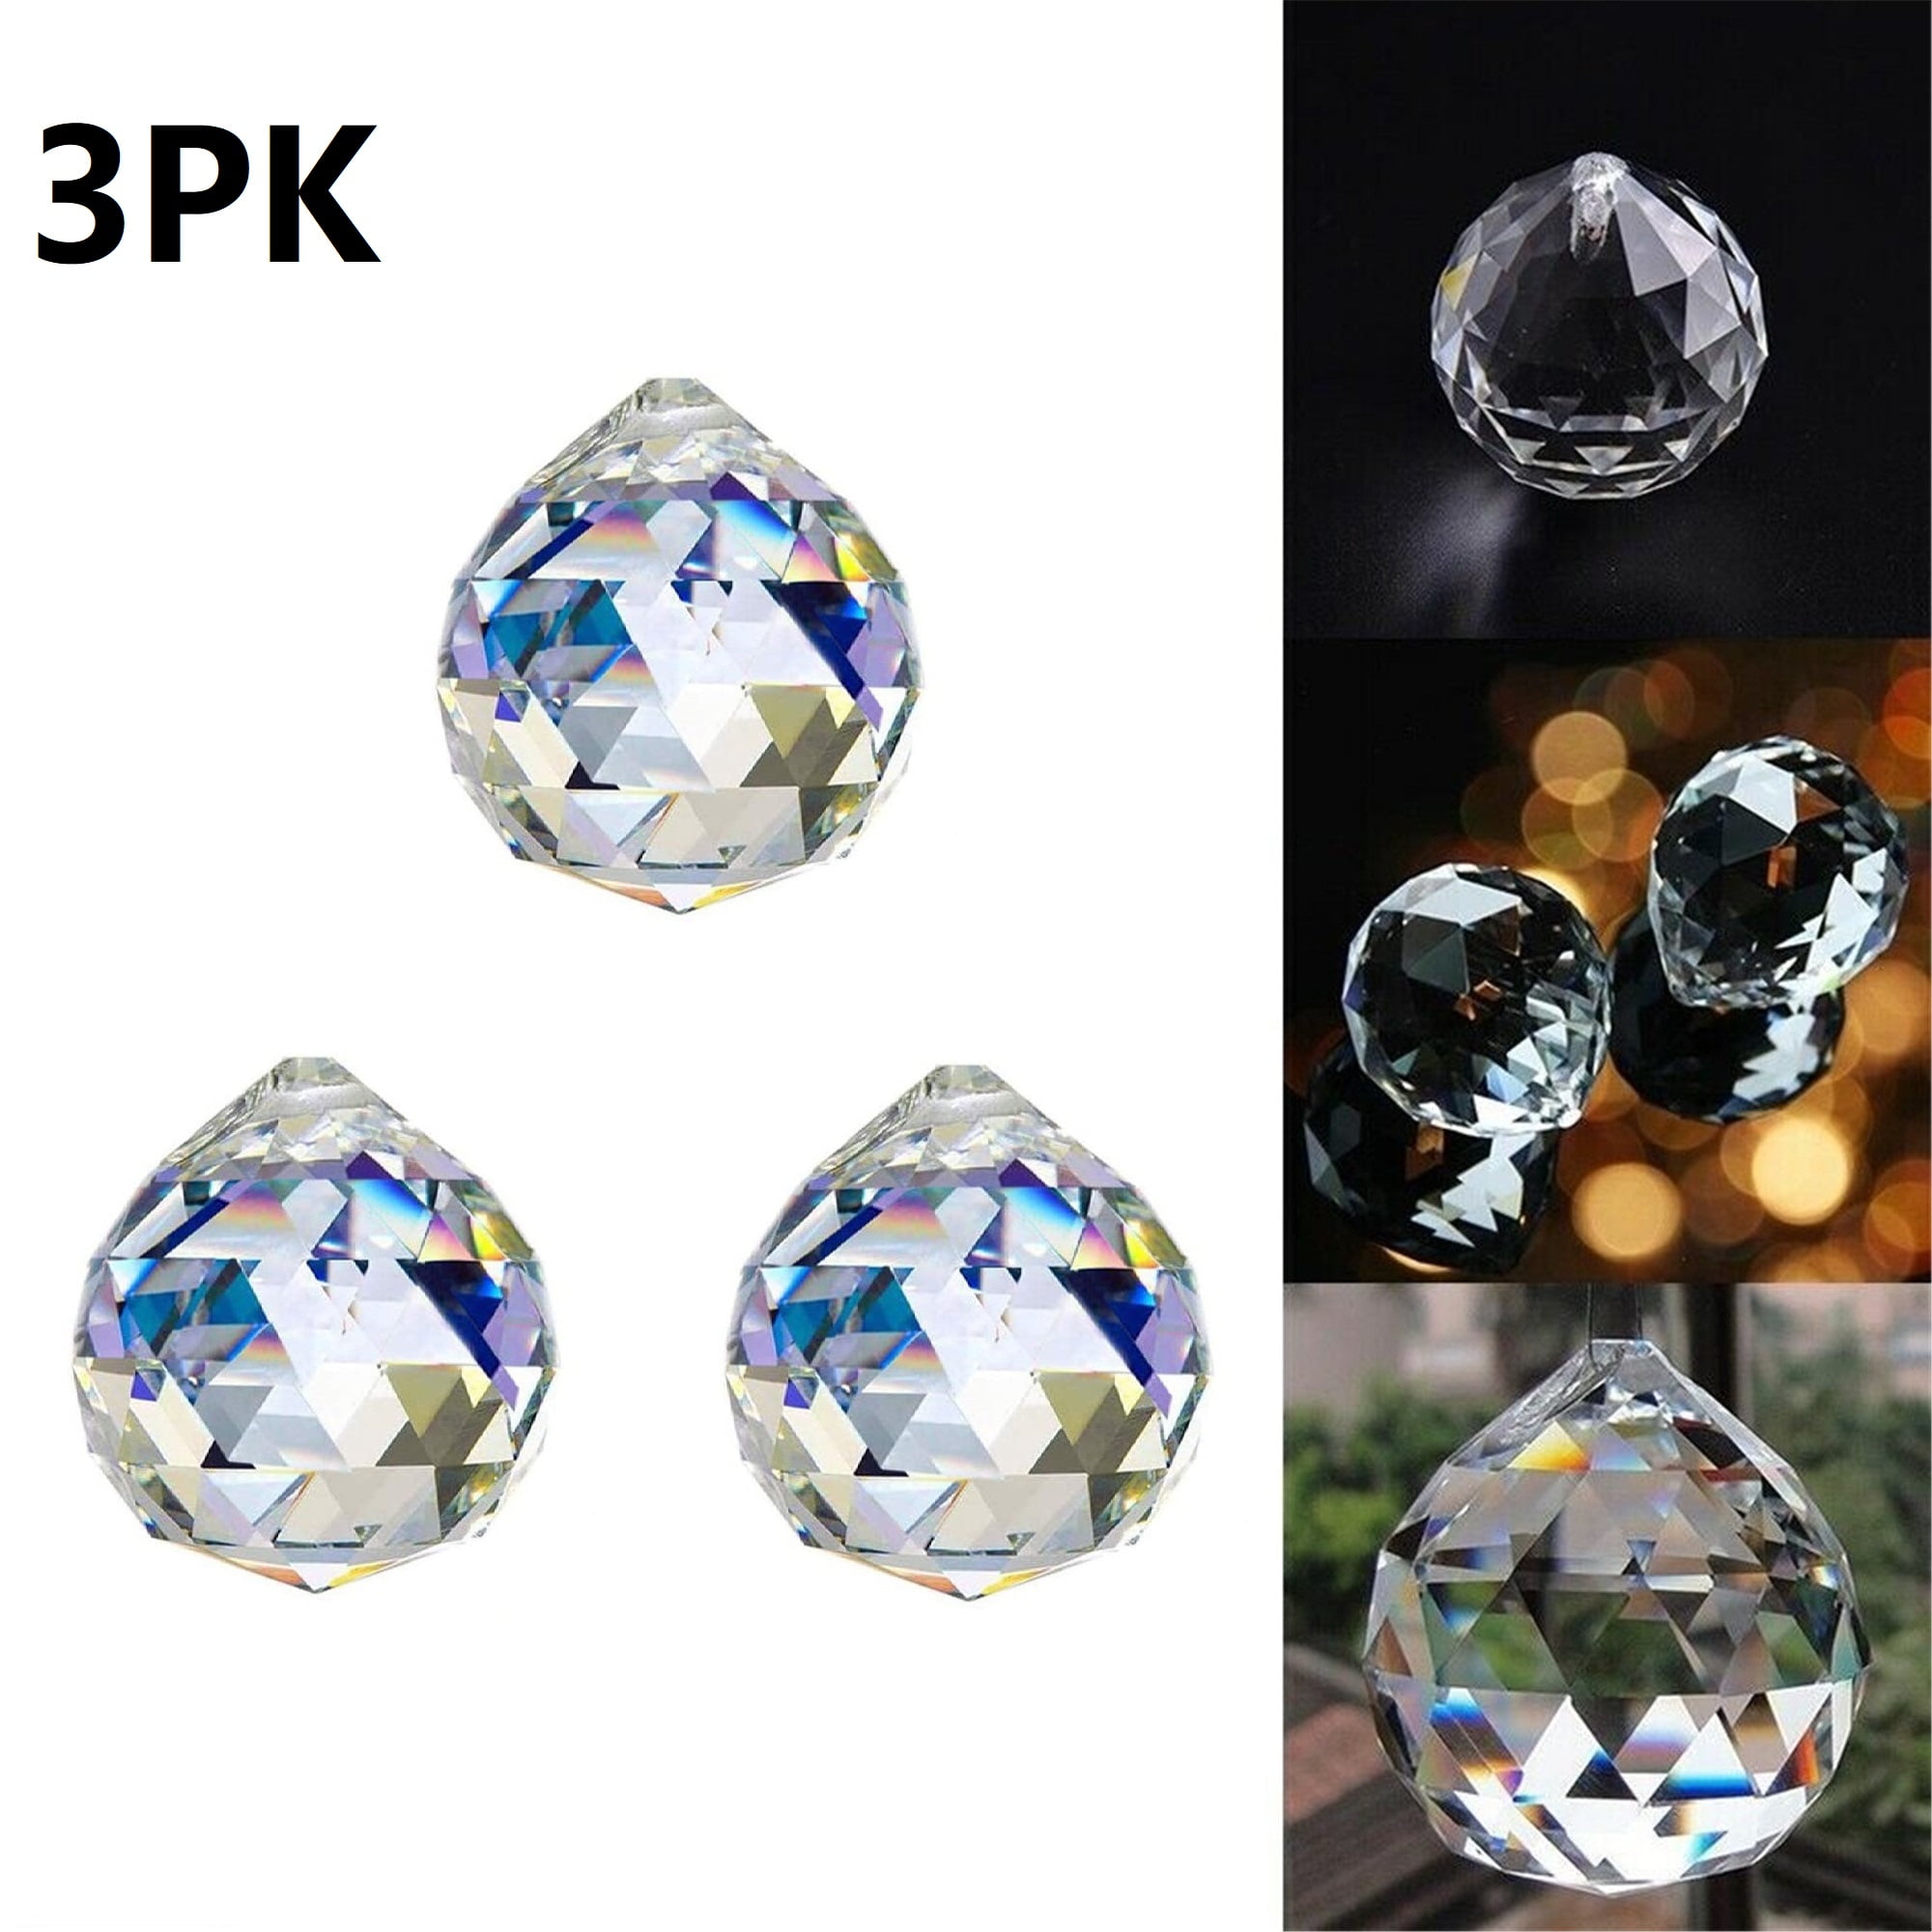 Faceted Glass Prism Crystal Diamond Natural Stone Lighting Drop Balls Home Decor 